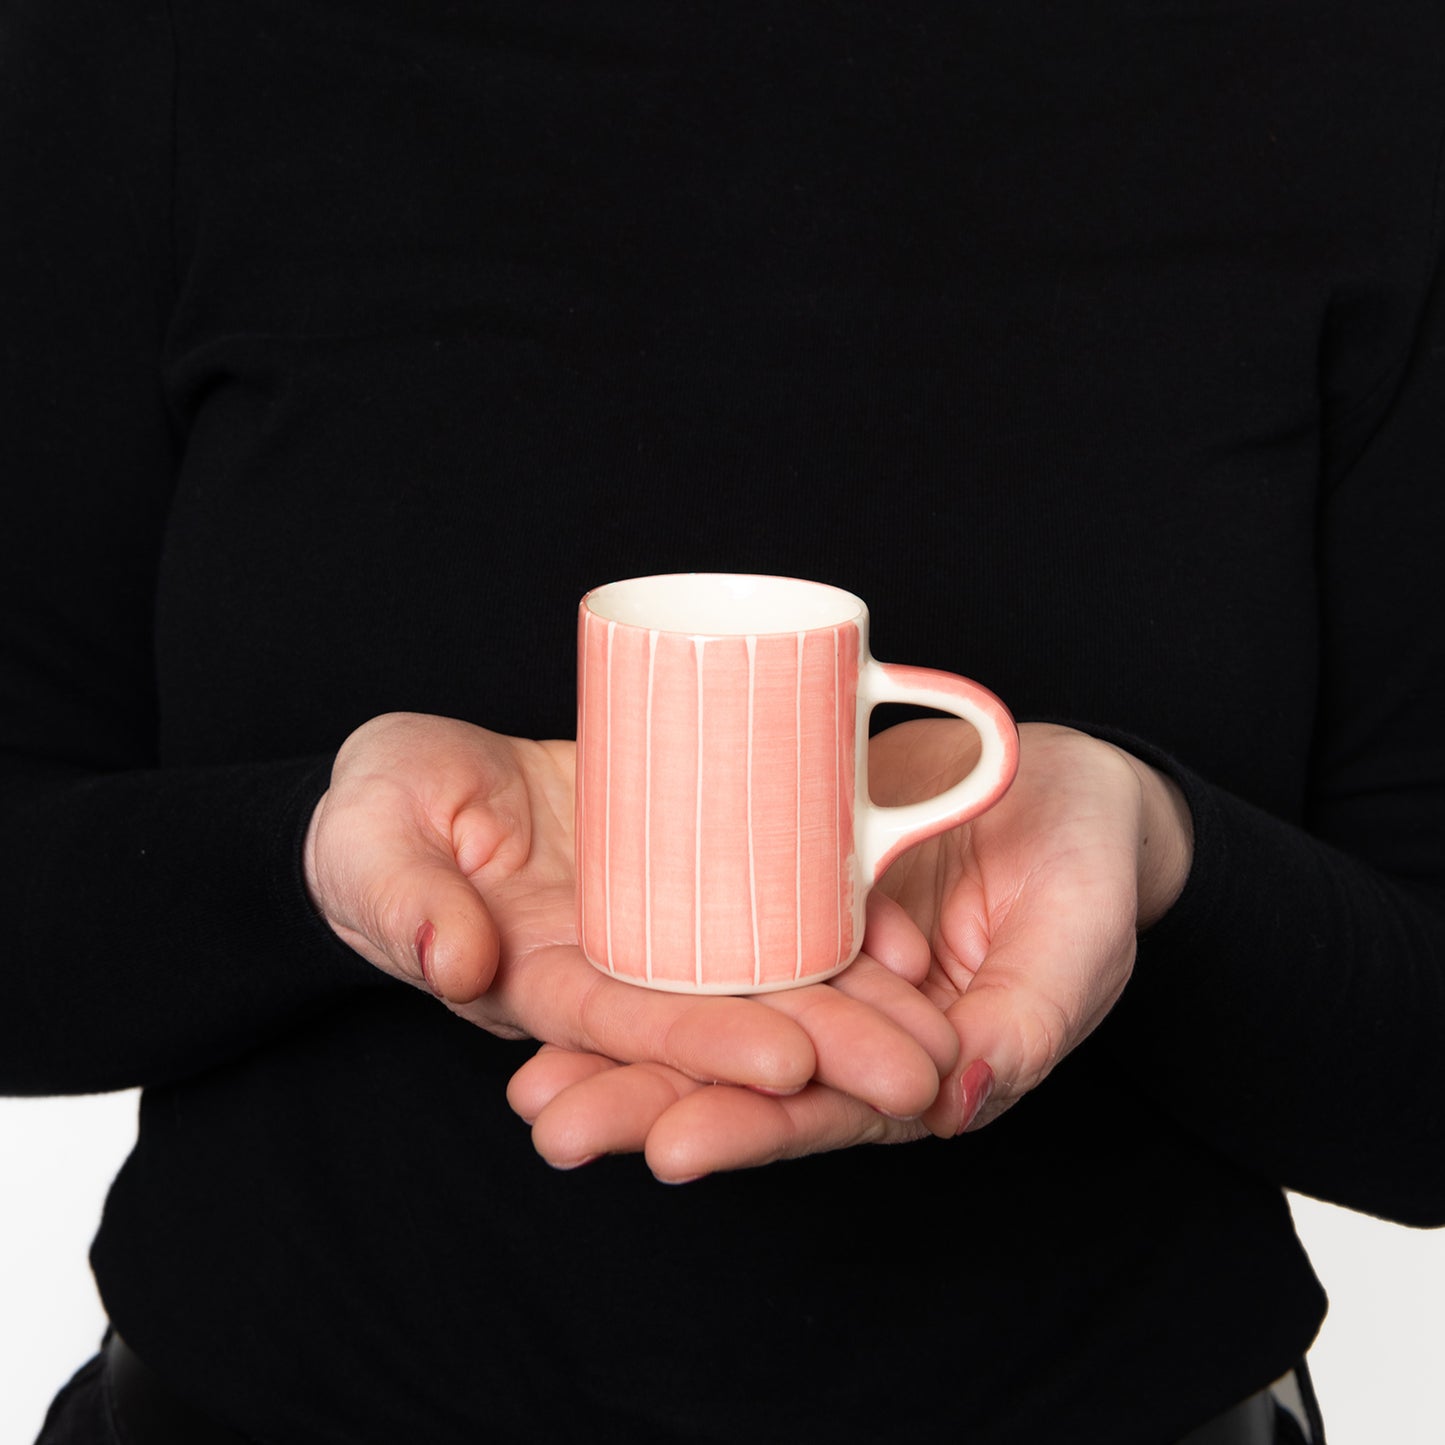 Model holding Espresso cup with pink wash with thin white vertical stripes